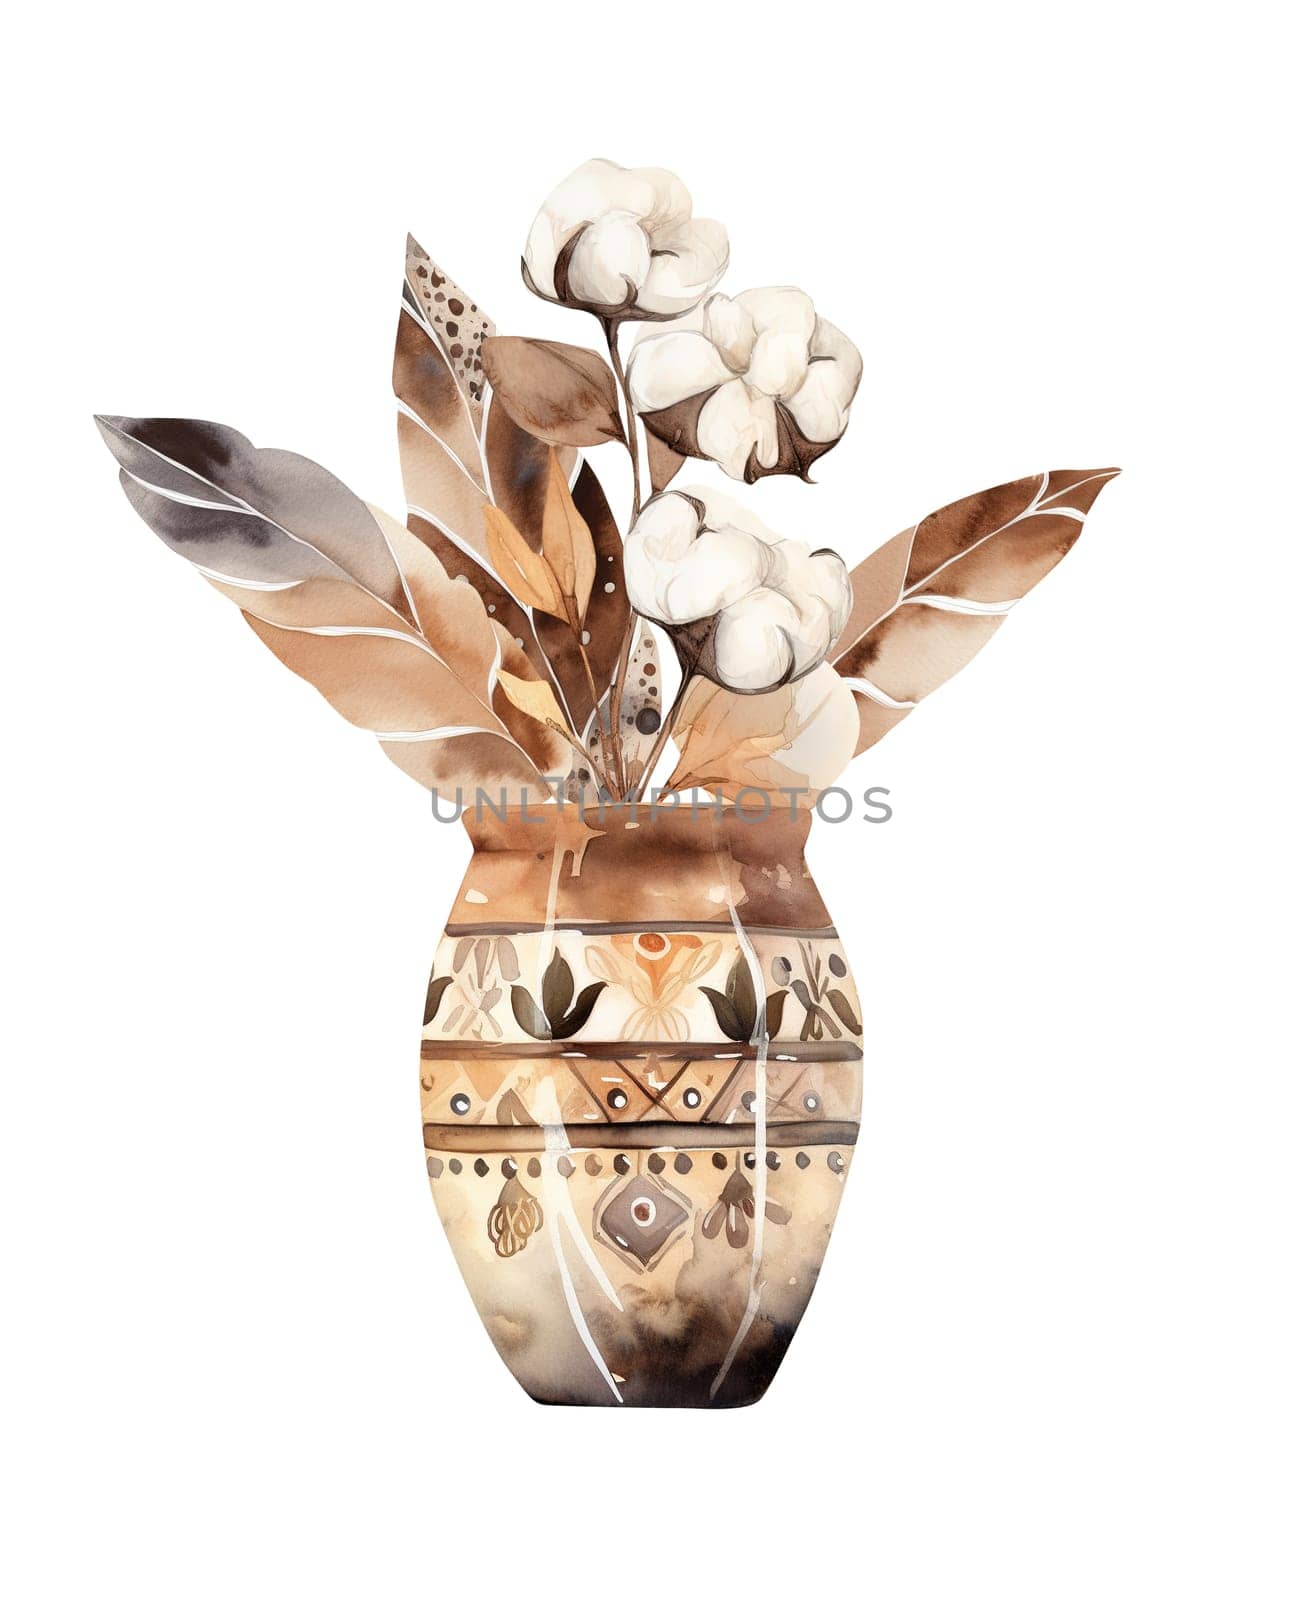 Watercolor Illustration In Boho Style Of Feathers In Vase, Isolated On White Background